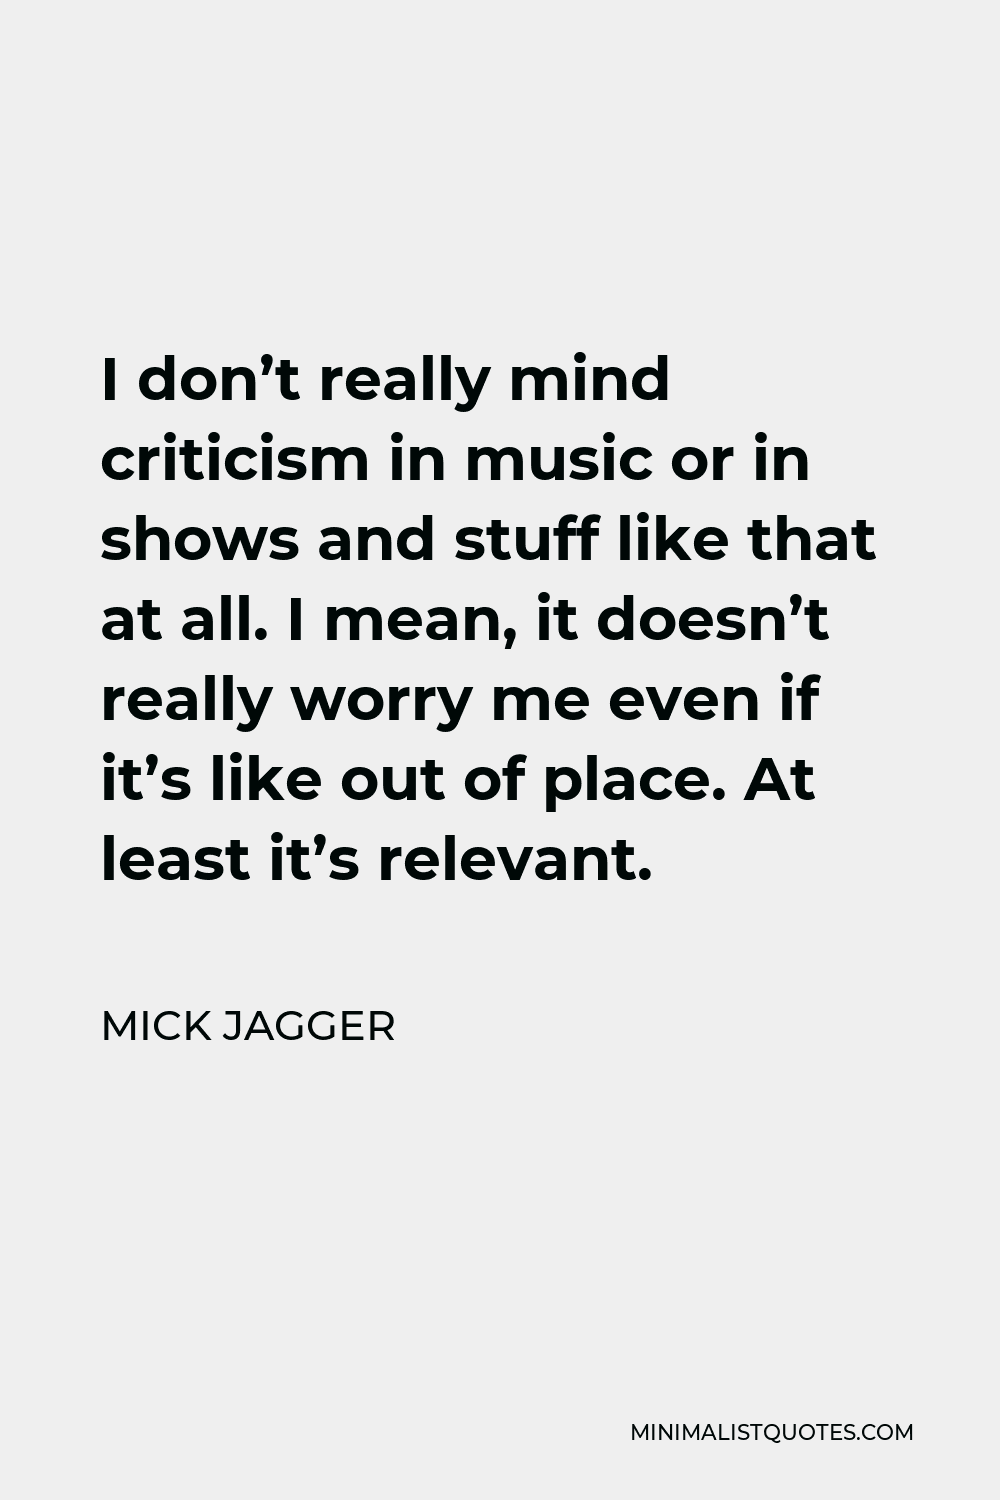 Mick Jagger Quote - I don’t really mind criticism in music or in shows and stuff like that at all. I mean, it doesn’t really worry me even if it’s like out of place. At least it’s relevant.